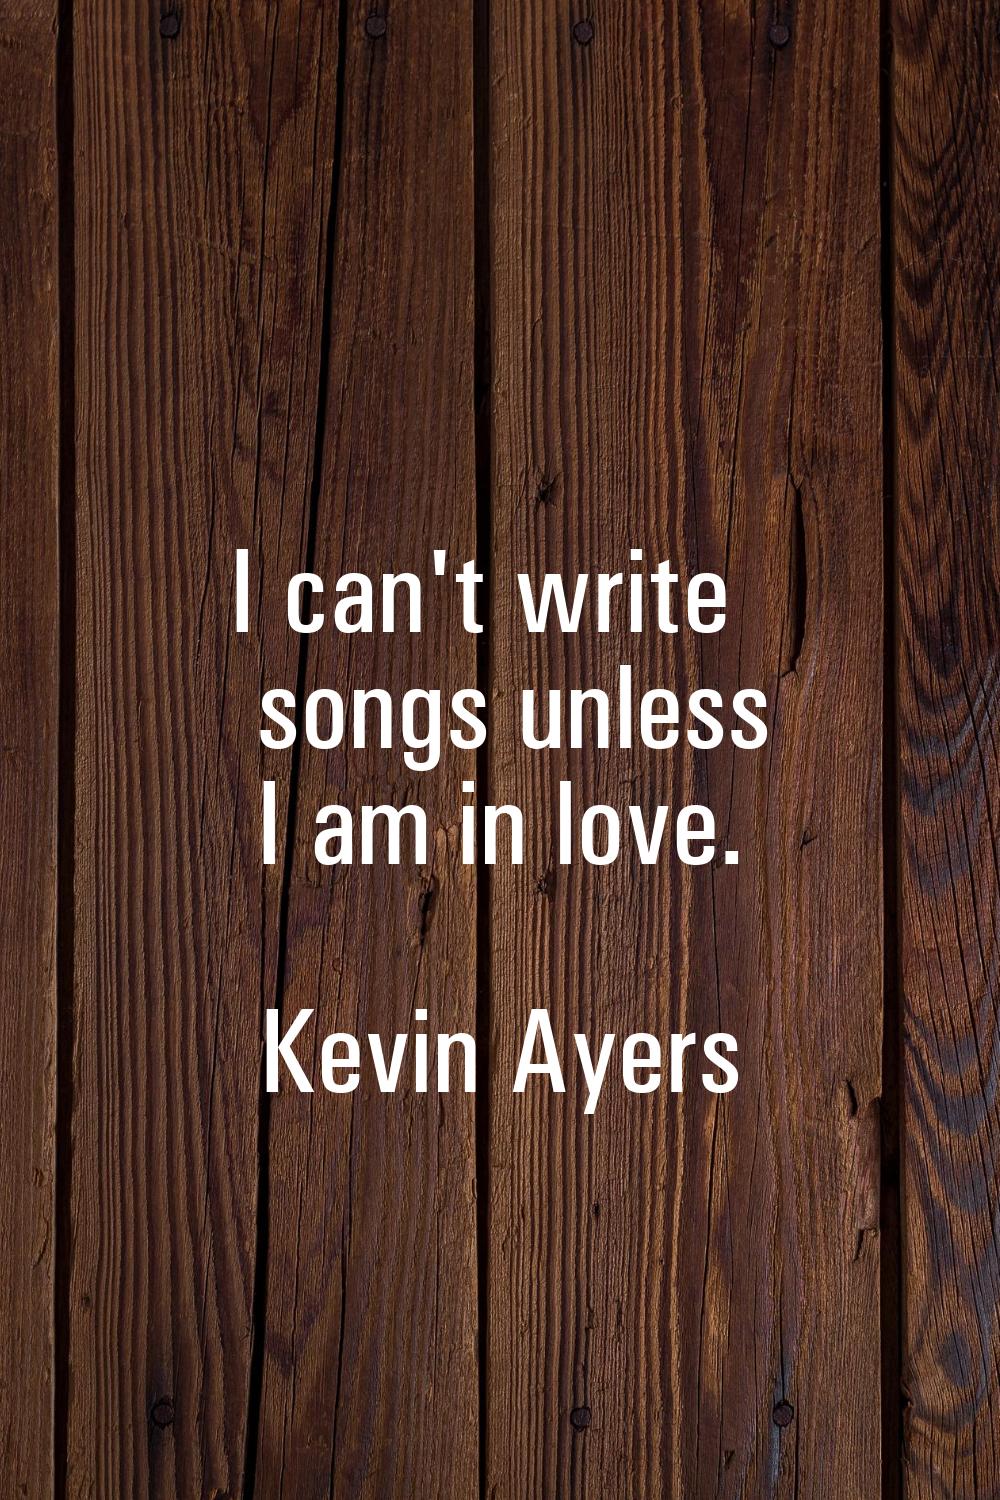 I can't write songs unless I am in love.